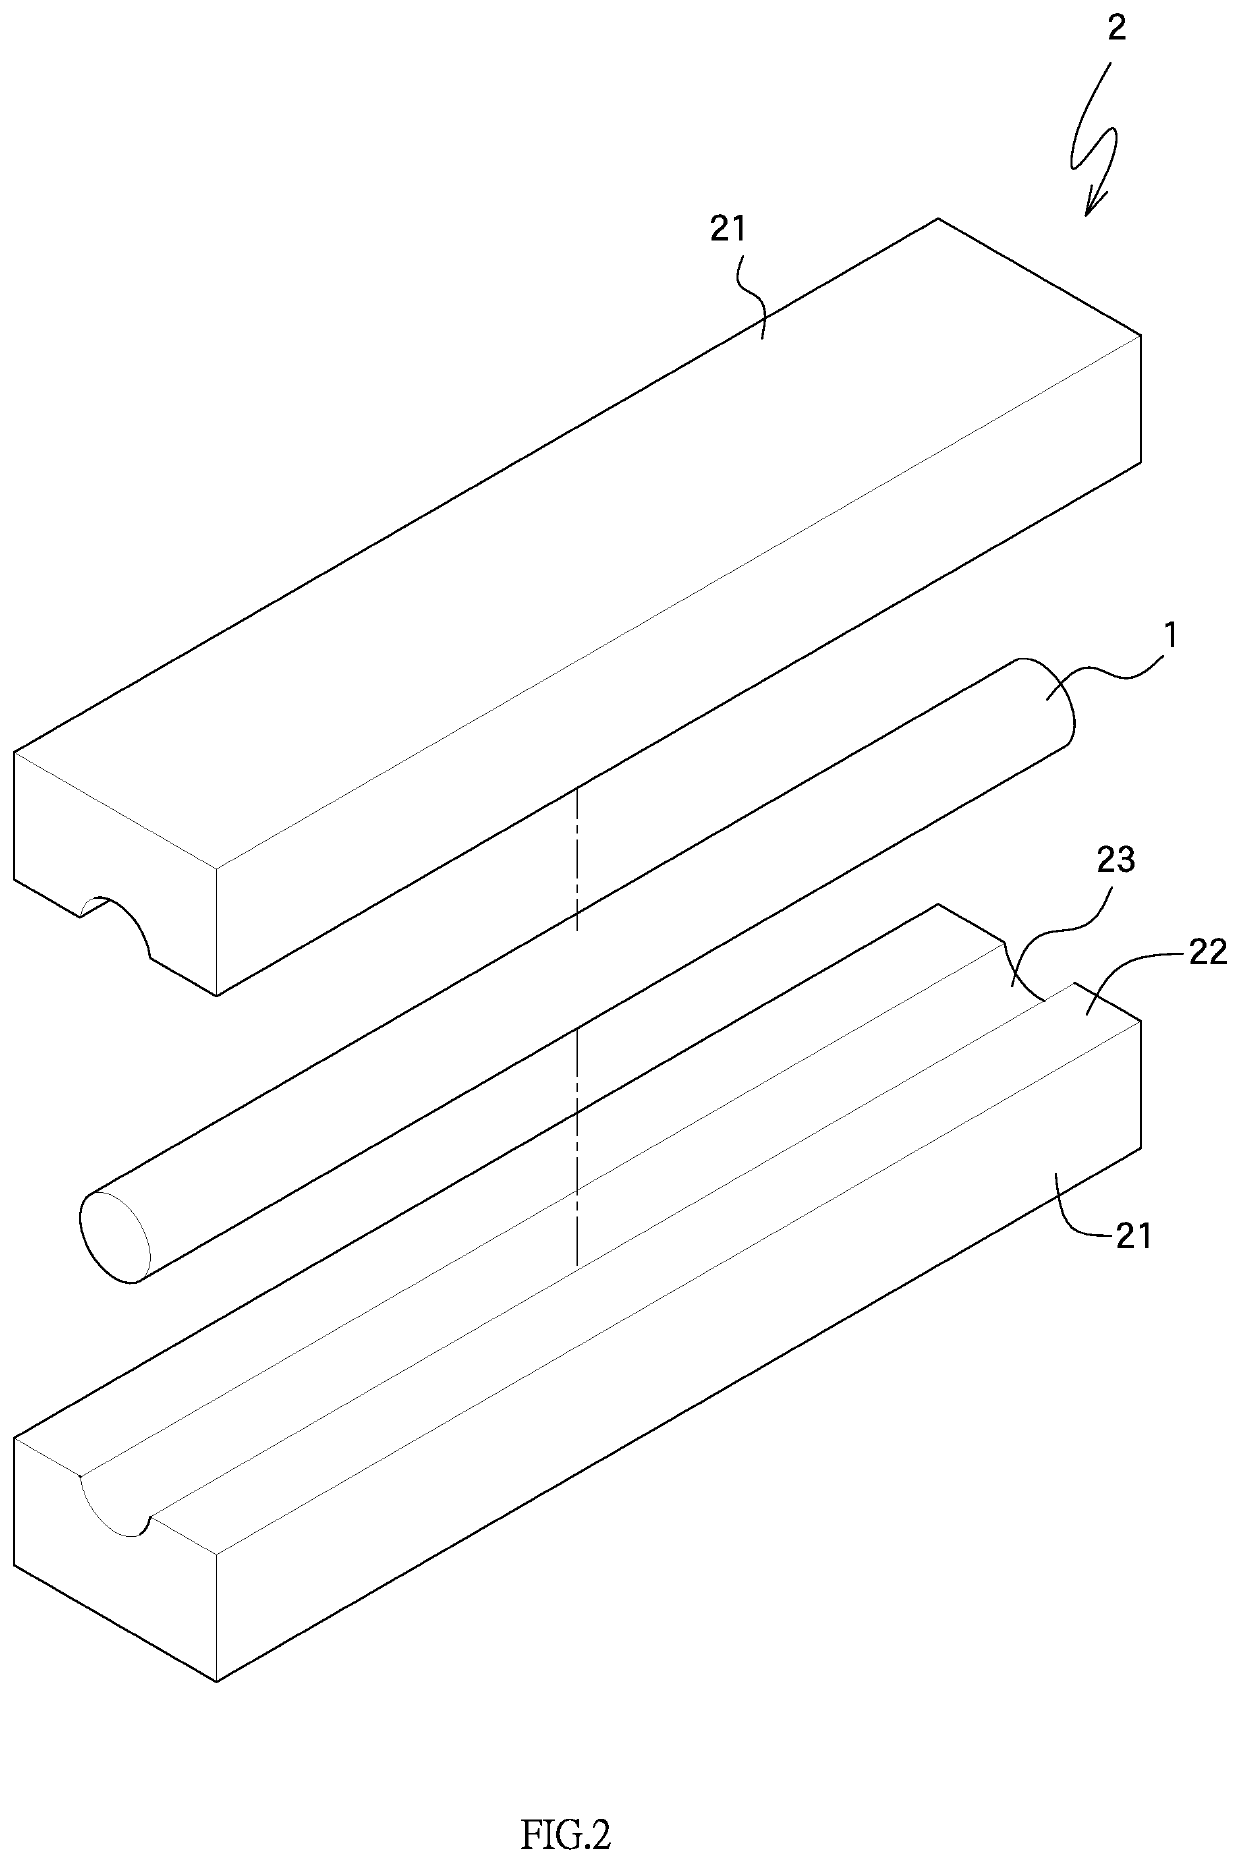 Method for making wooden straws and molding set for making the wooden straws